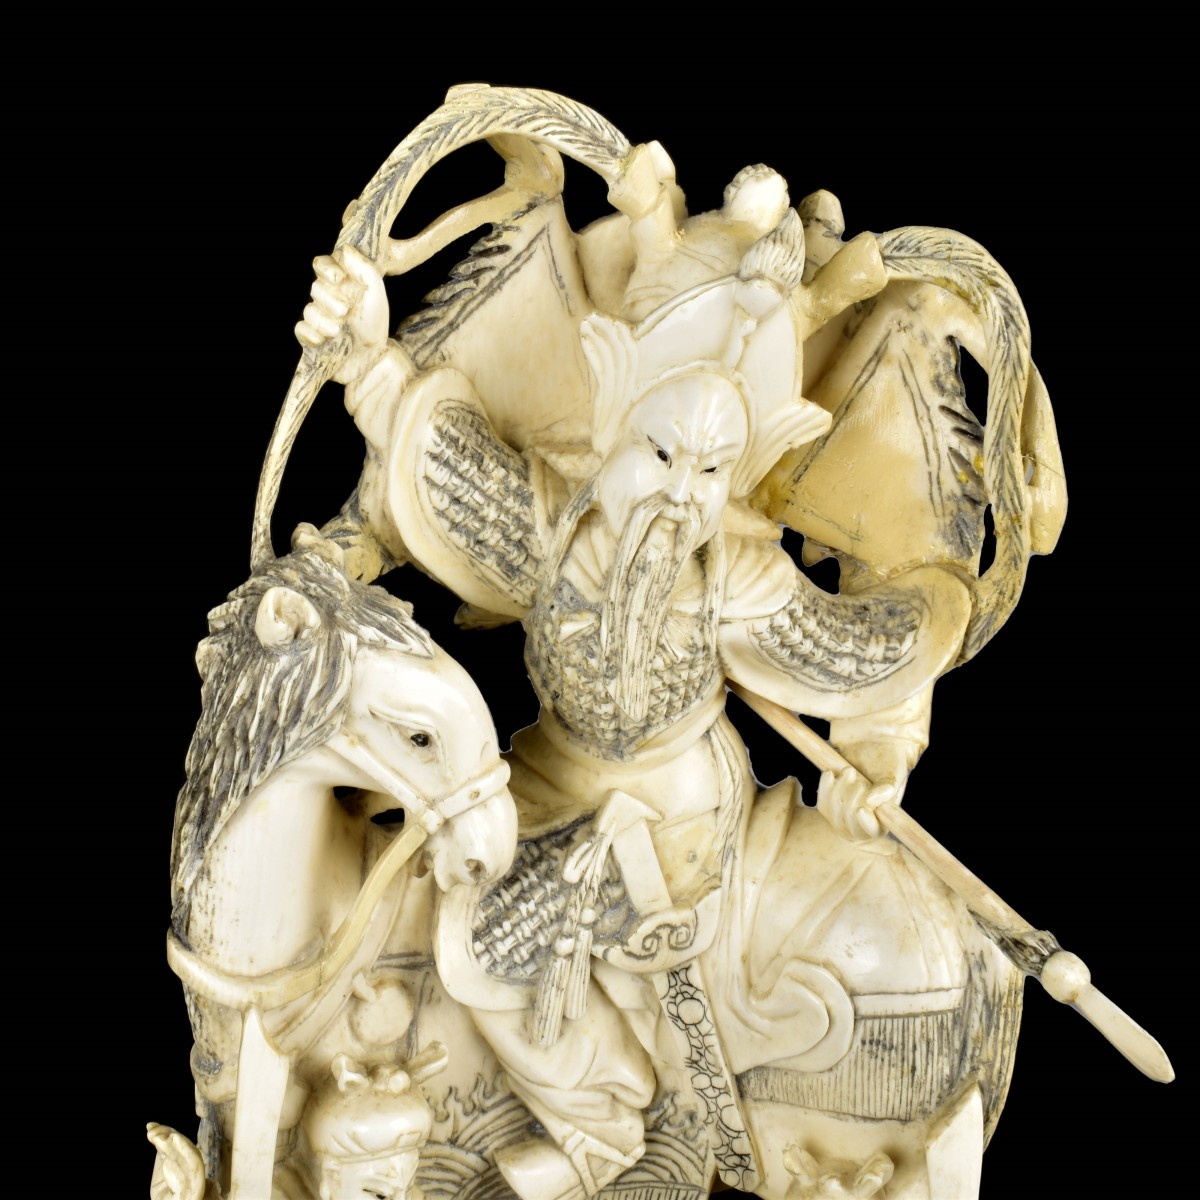 Pair of Chinese Carved Warriors on Horseback